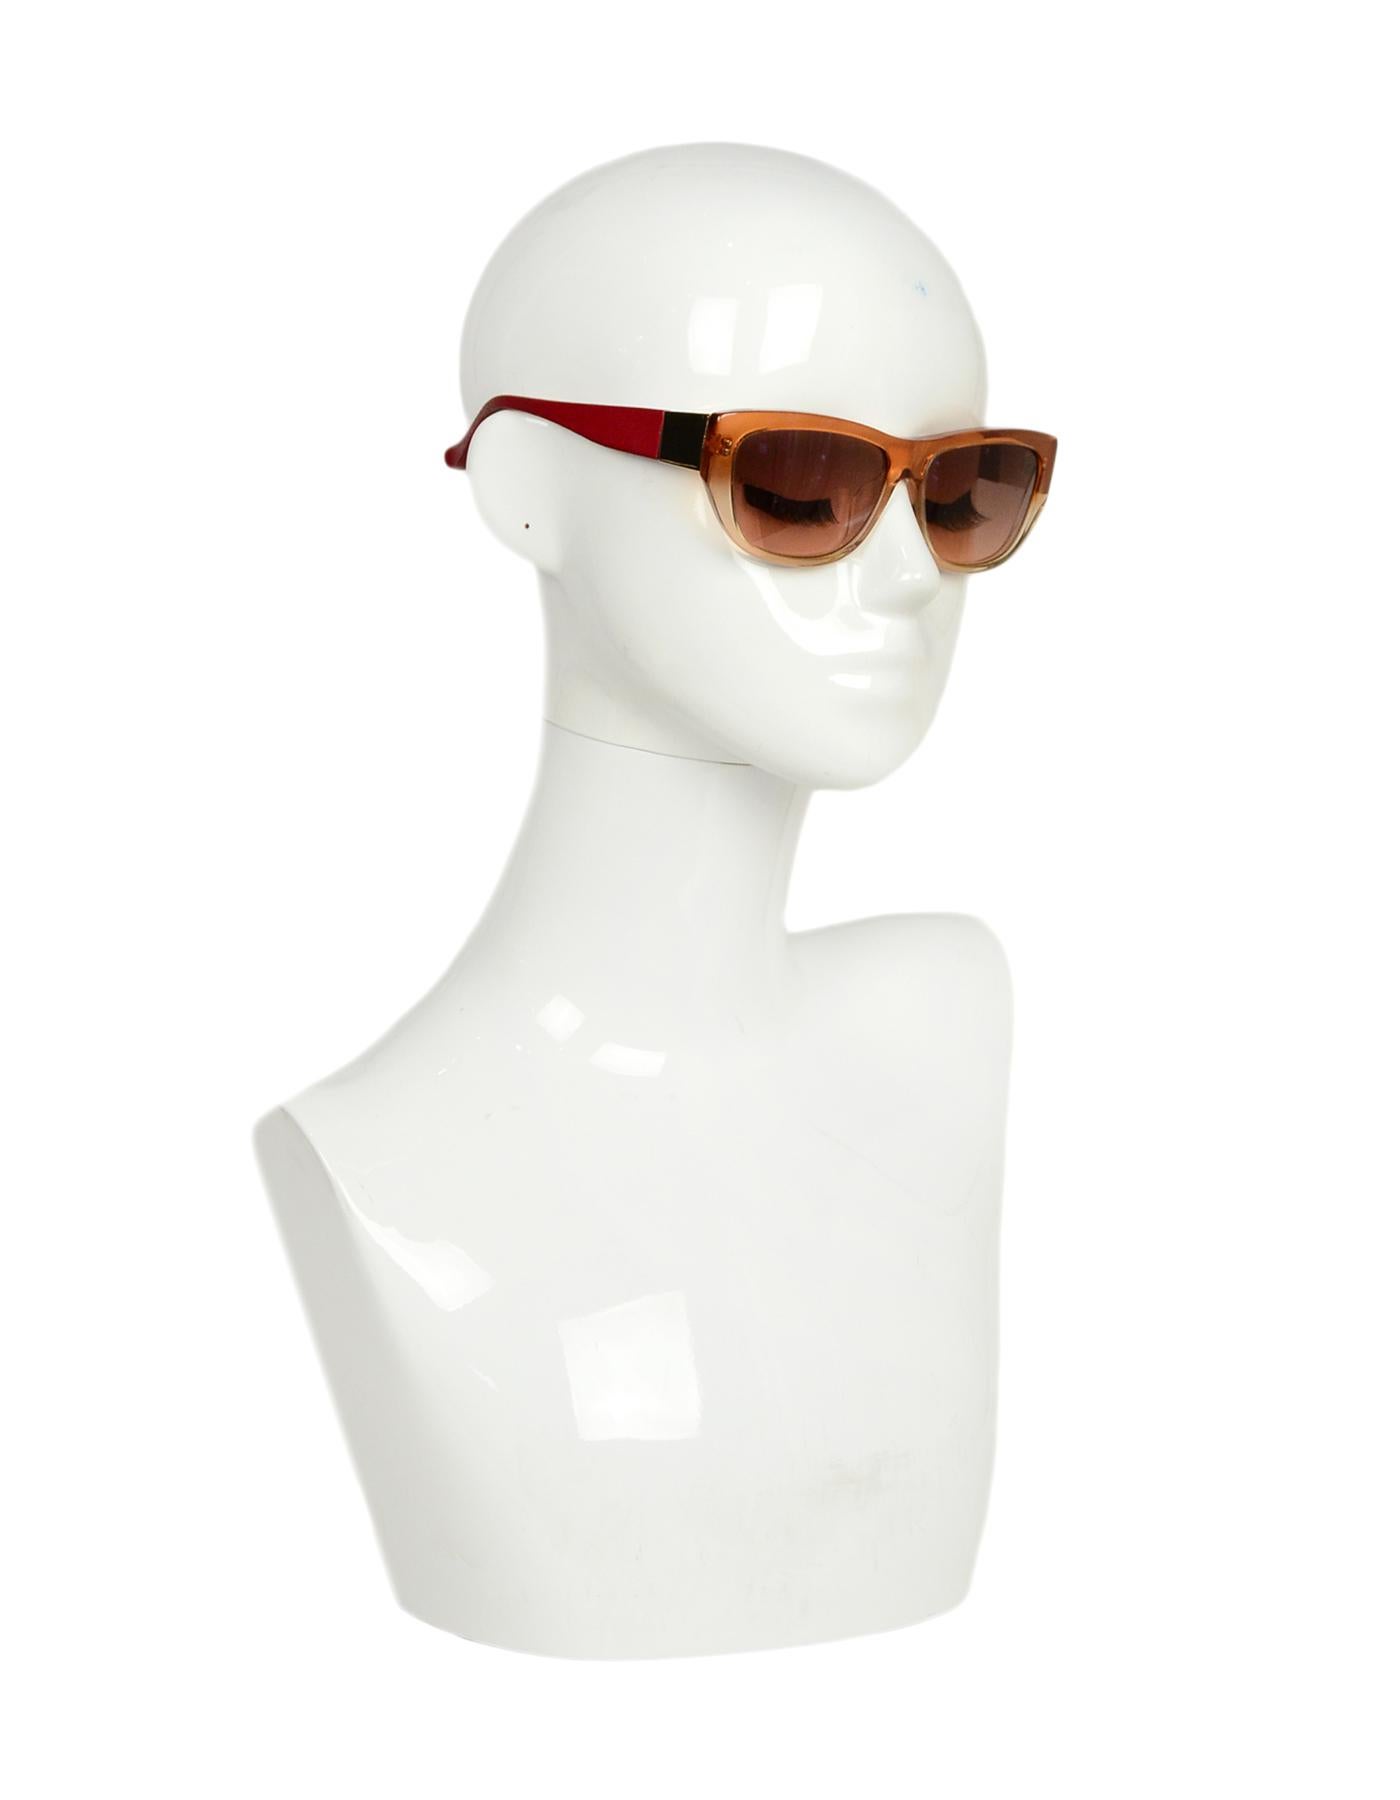 Linda Farrow x The Row Orange Ombre Sunglasses w/ Leather Accent

Made In: Japan
Color: Orange
Hardware: Goldtone hardware
Materials: Resin, leather accent
Overall Condition: Excellent pre-owned condition, with the exception of hairline scratches to